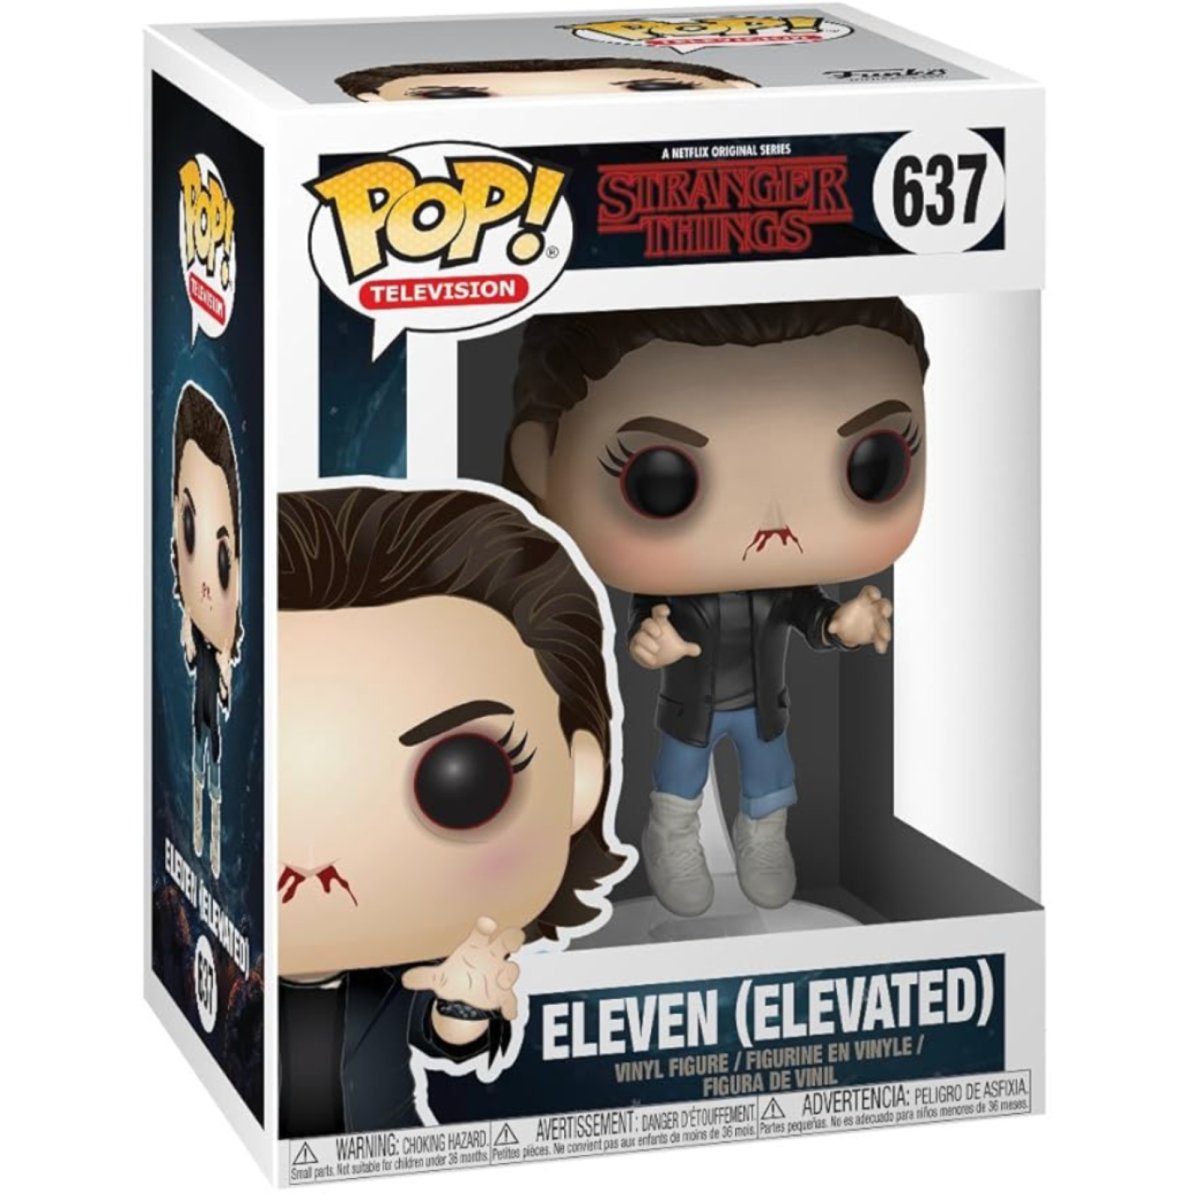 Stranger Things - Eleven [Elevated] #637 - Funko Pop! Vinyl Television - Persona Toys